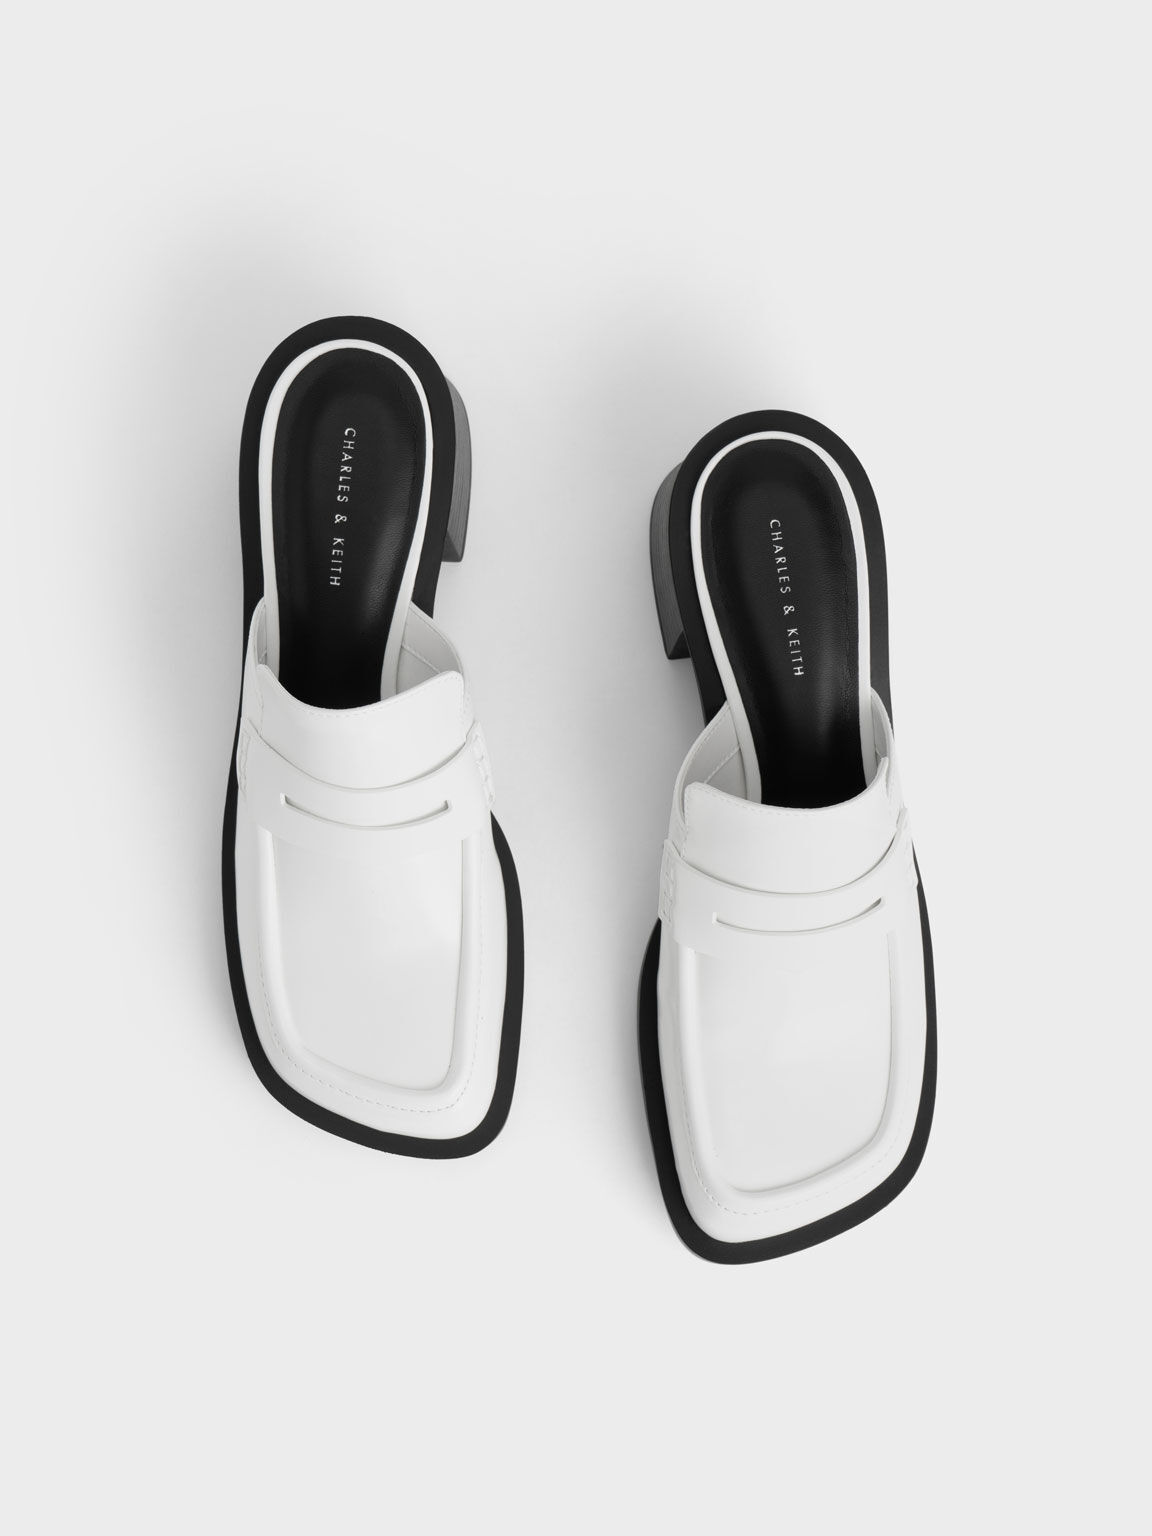 Penny Loafer Mules, White, hi-res